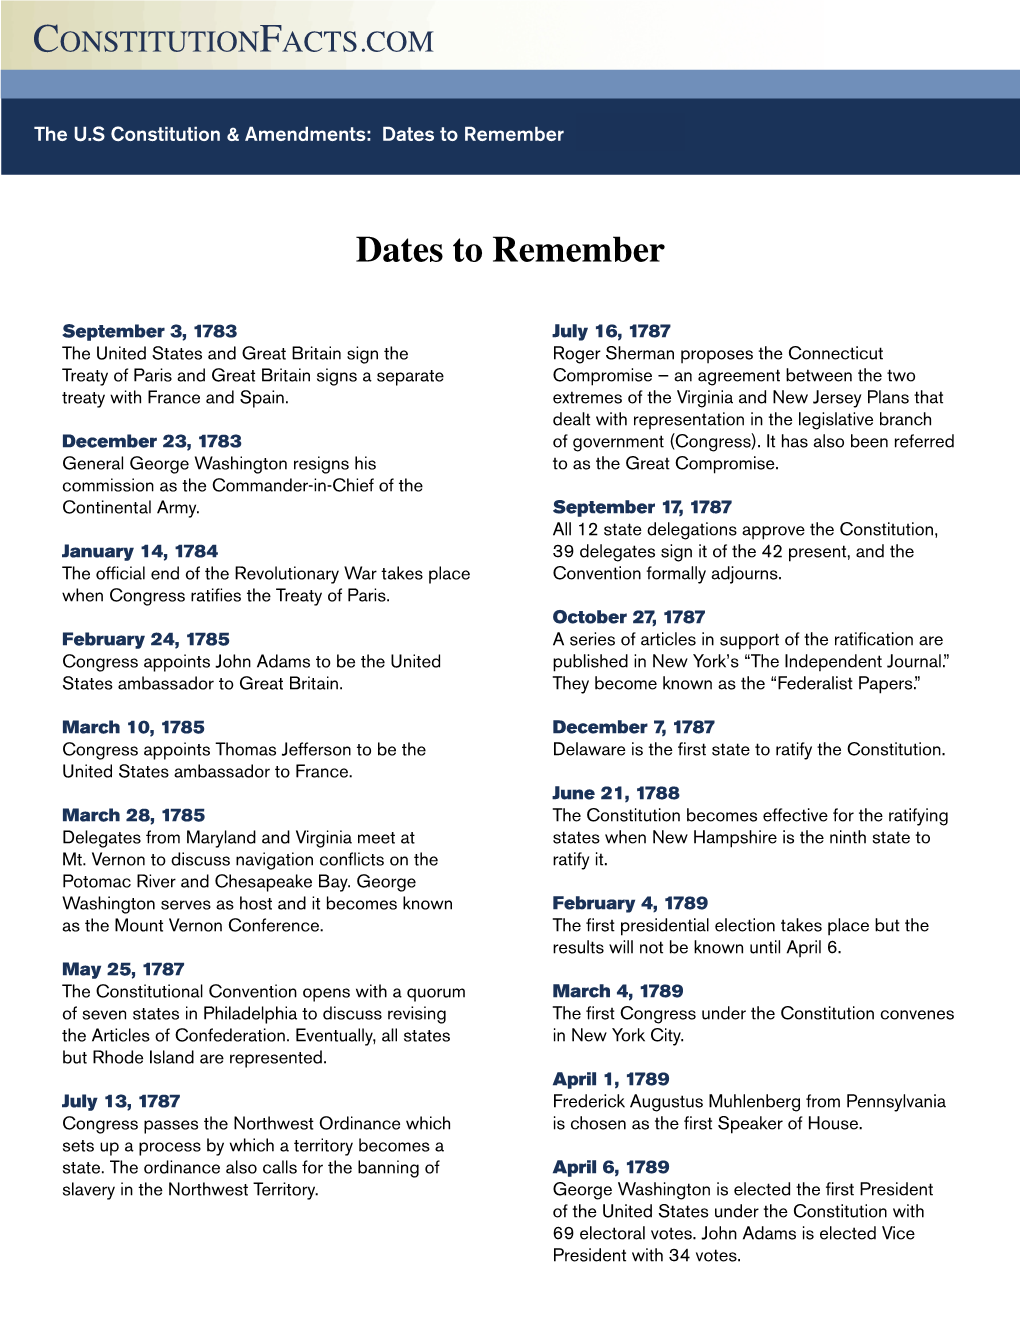 The US Constitution & Amendments: Dates to Remember